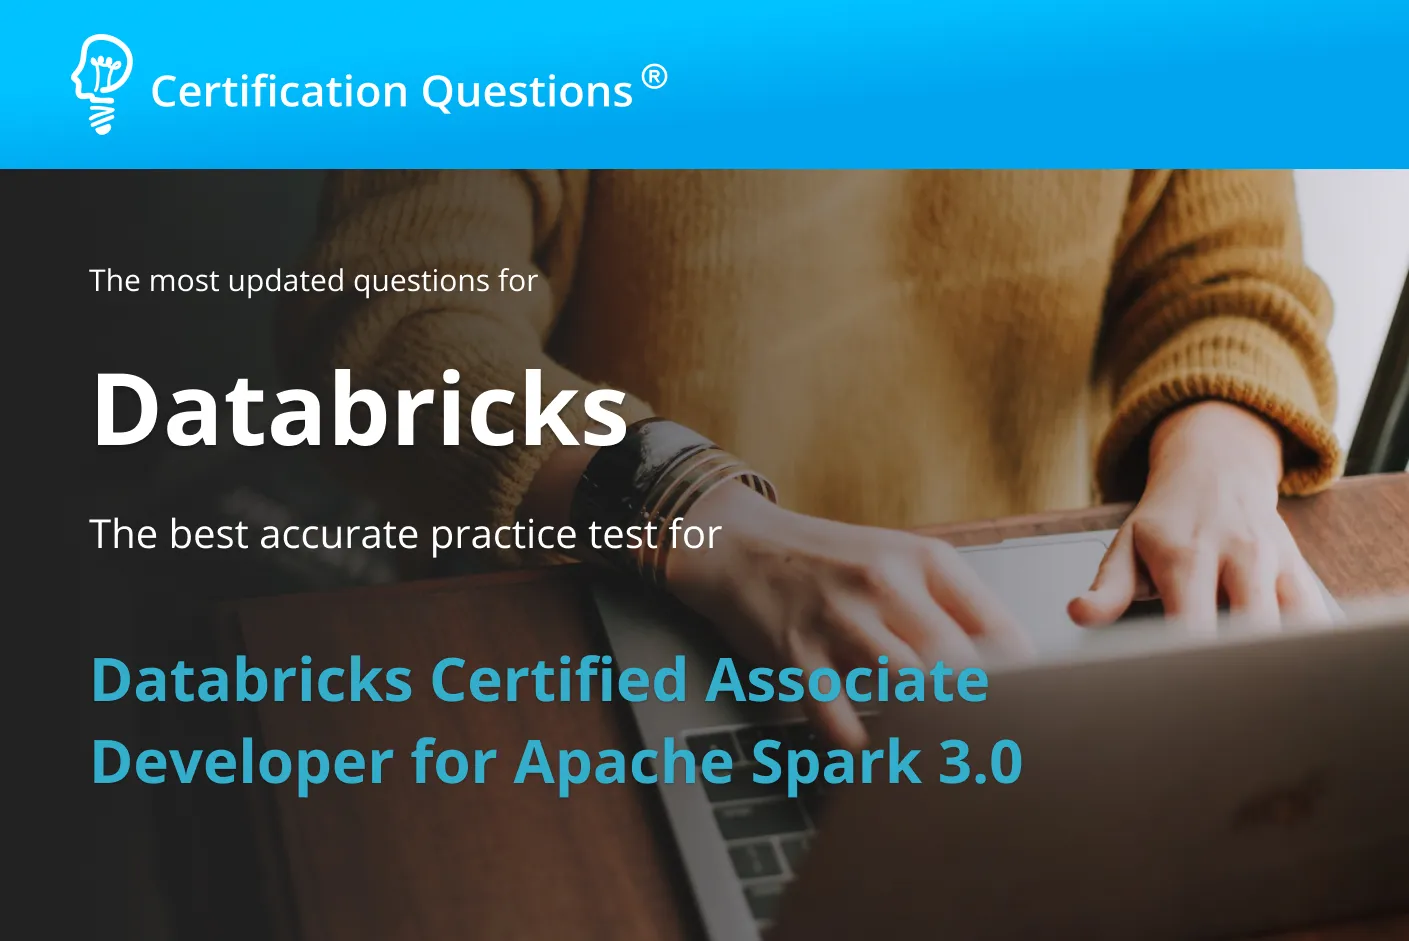 This image is related to apache spark certification questions